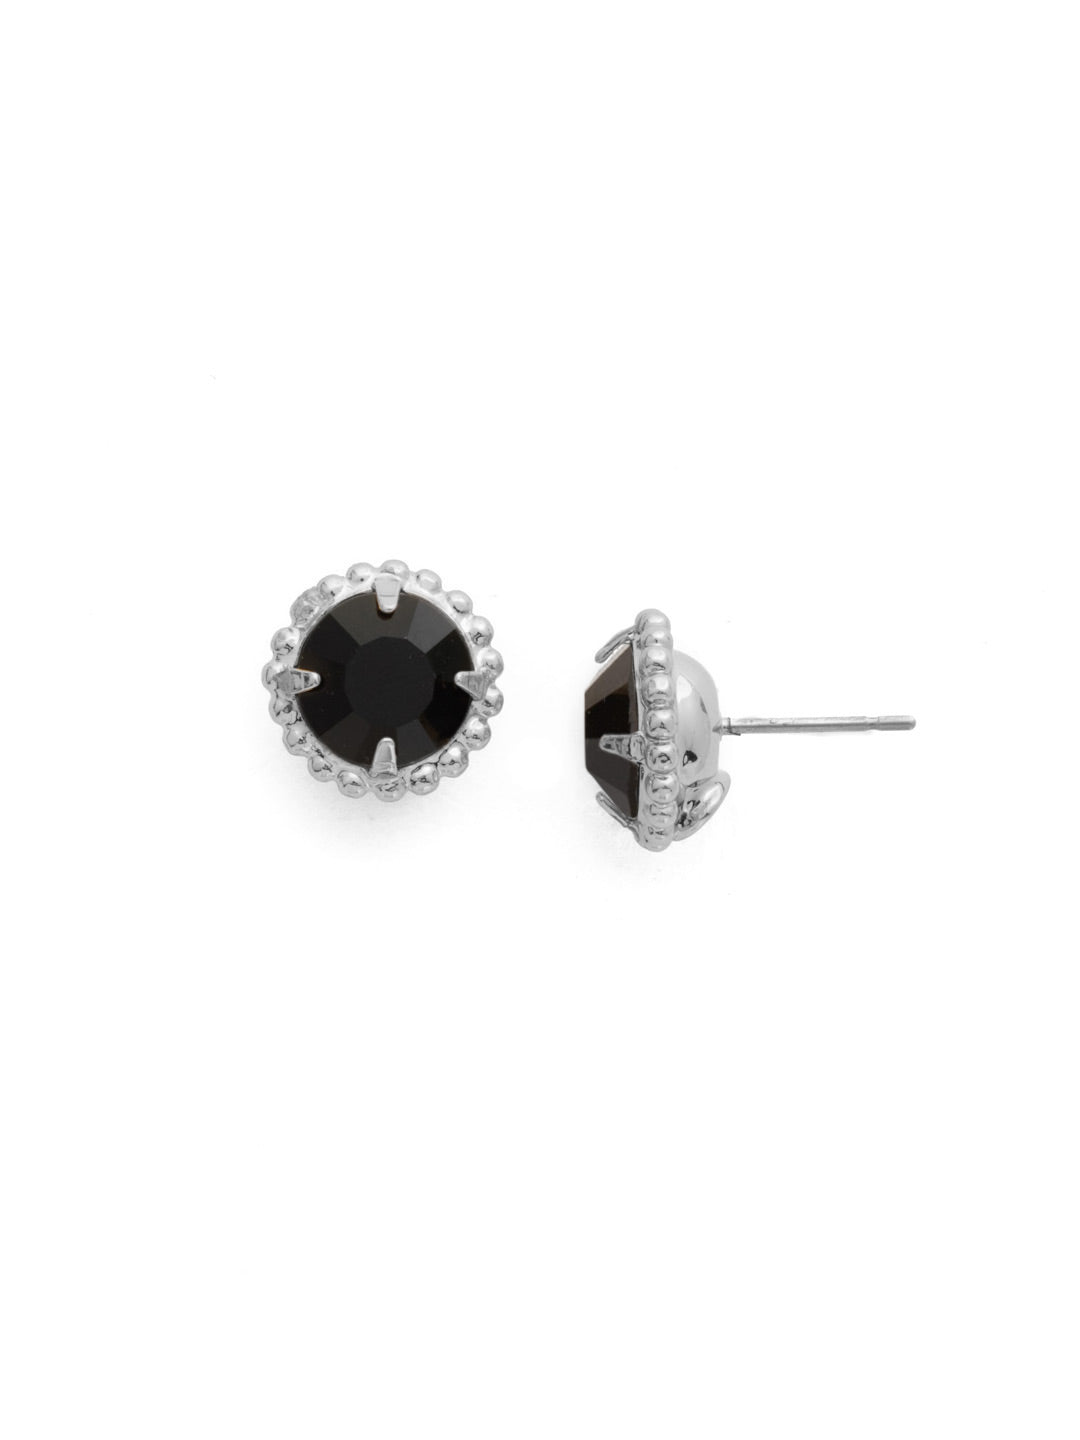 Simplicity Stud Earrings - EBY38PDJET - <p>A timeless classic, the Simplicity Stud Earrings feature round cut crystals in a variety of colors; accented with a halo of metal beaded detail. Need help picking a stud? <a href="https://www.sorrelli.com/blogs/sisterhood/round-stud-earrings-101-a-rundown-of-sizes-styles-and-sparkle">Check out our size guide!</a> From Sorrelli's Jet collection in our Palladium finish.</p>